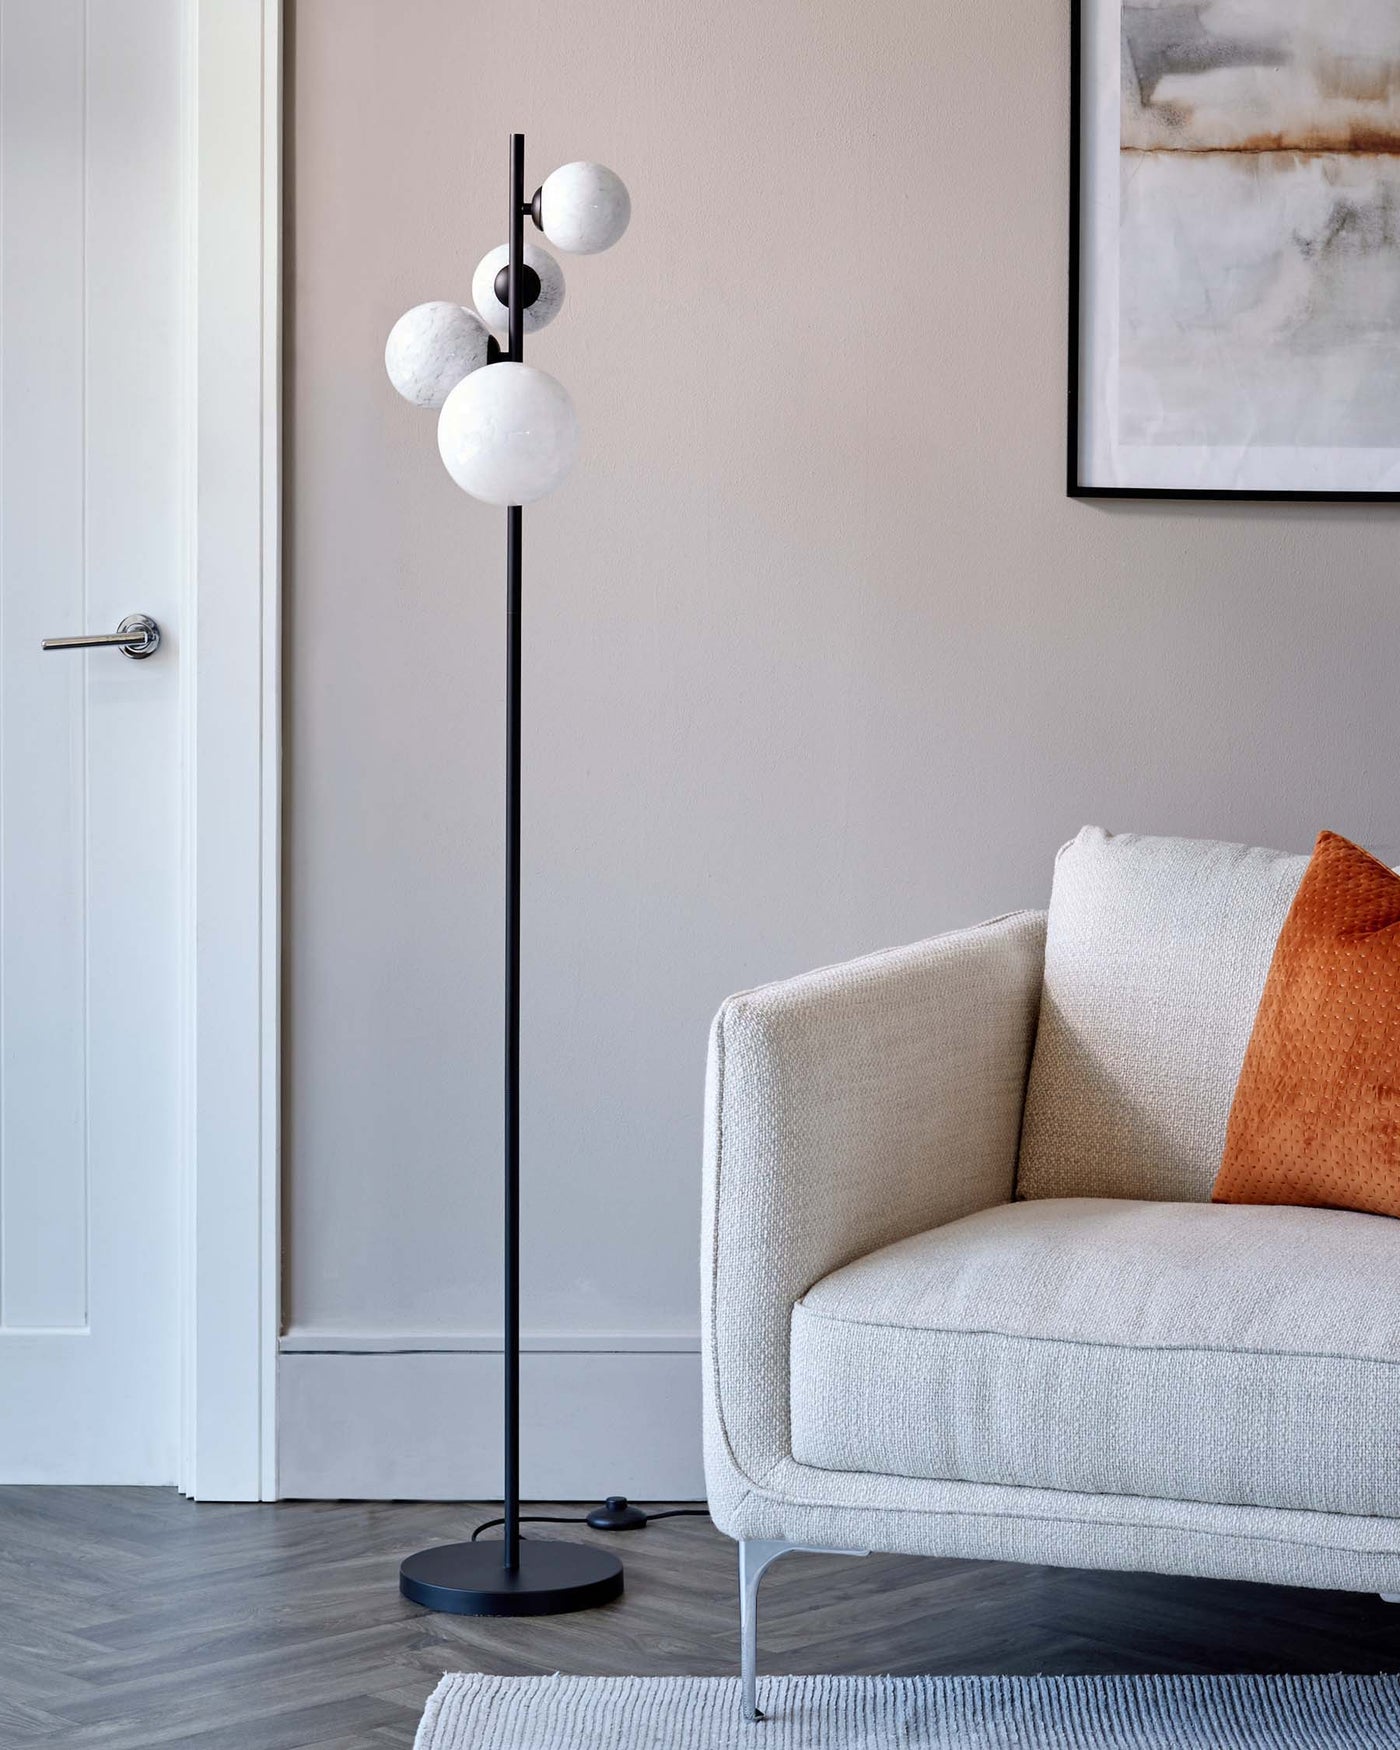 Modern interior with a minimalist white fabric upholstered armchair and a stylish floor lamp featuring a black stand and spherical white shades.